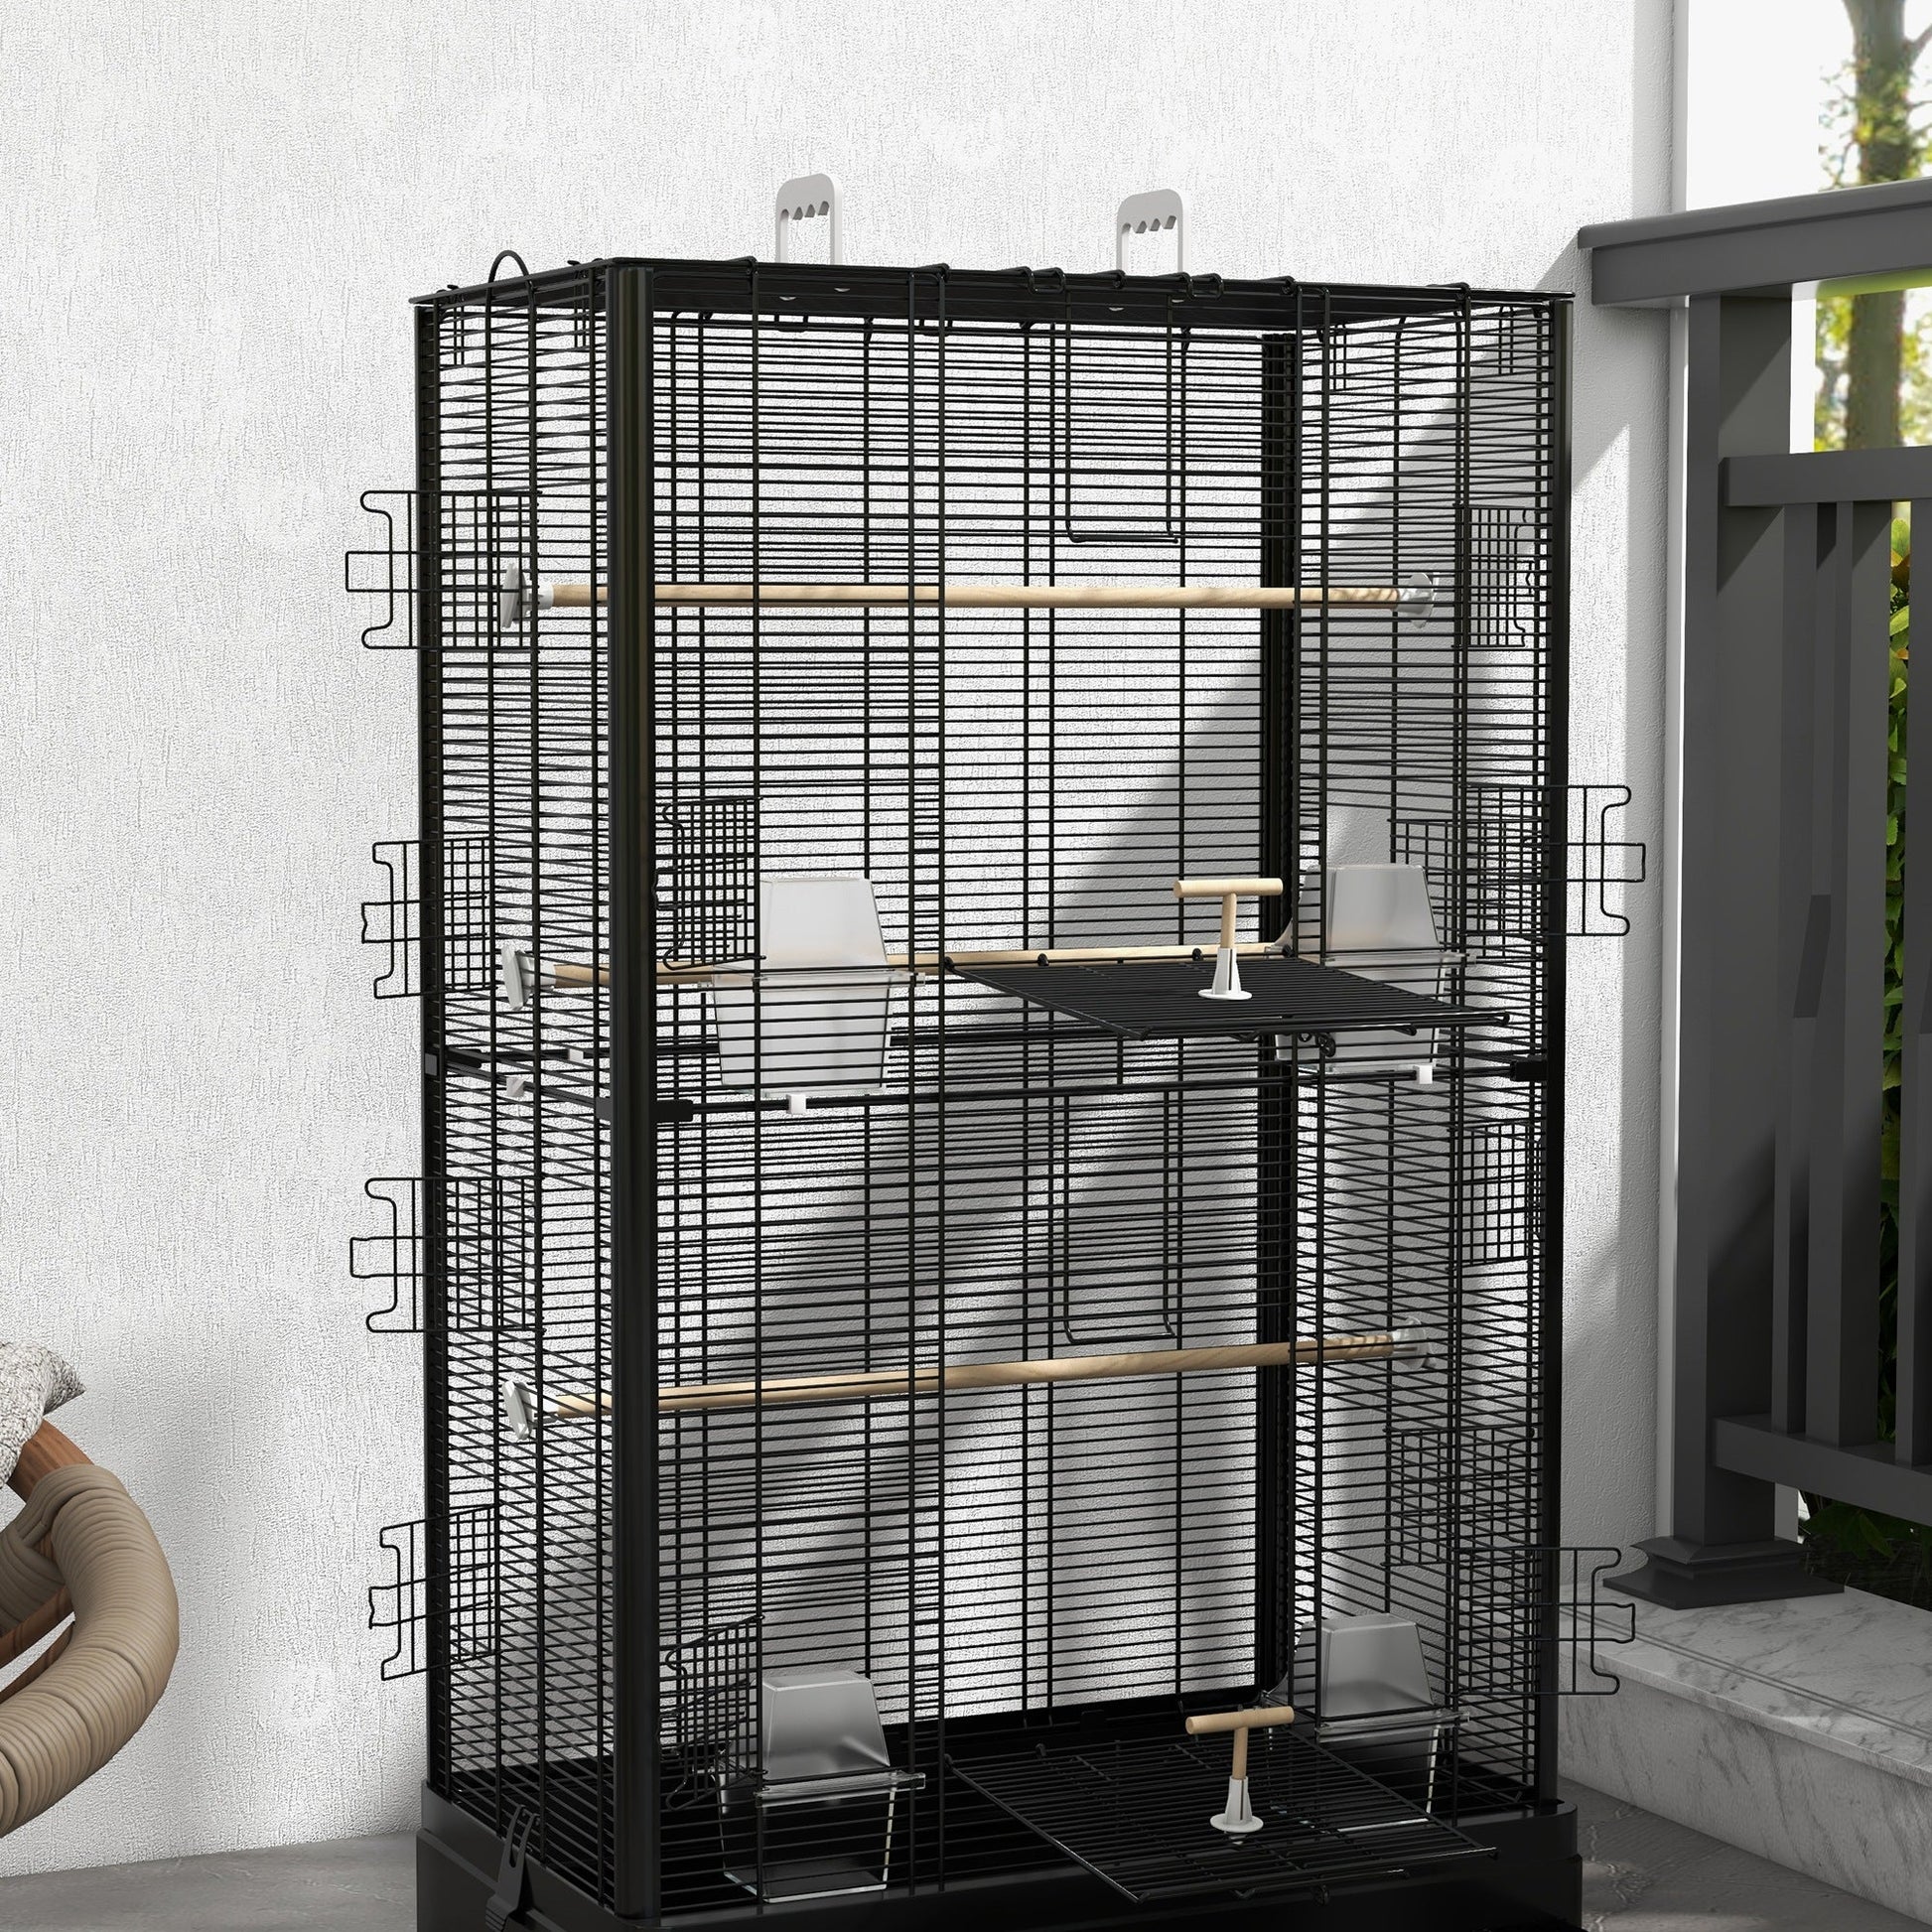 39" Bird Cage for Budgie Finches Canaries Love Birds with Wooden Stands, Slide-Out Tray, Handles, Food Containers, Black at Gallery Canada